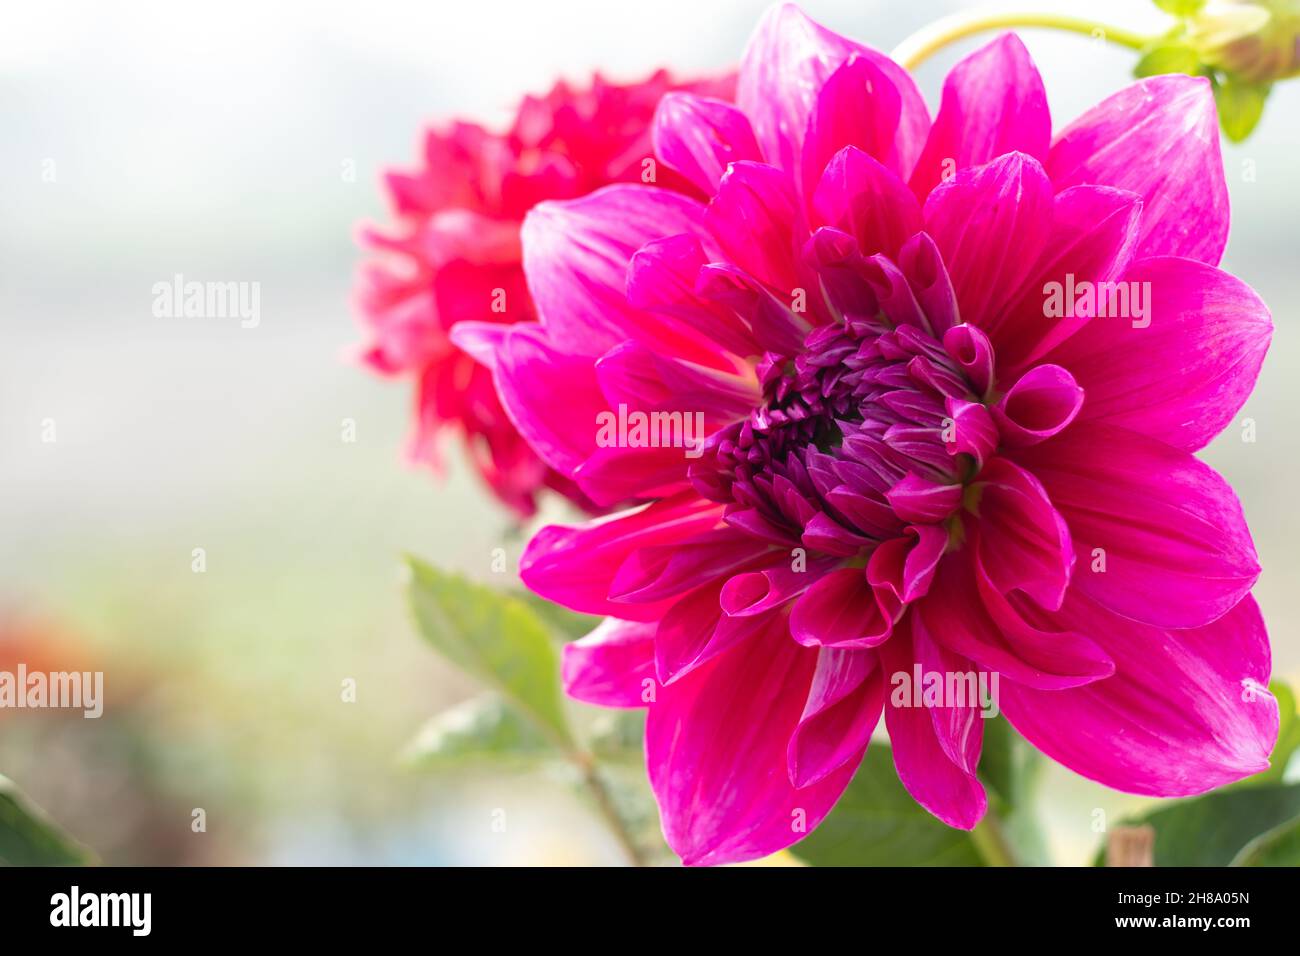 Pink Colored Fubuki Also Known As Dahlia, Dalia Phool With Wither, Faded Or Shrivel Petals. Is Genus Of Sunflower, Asteraceae Family. Bright Flower In Stock Photo